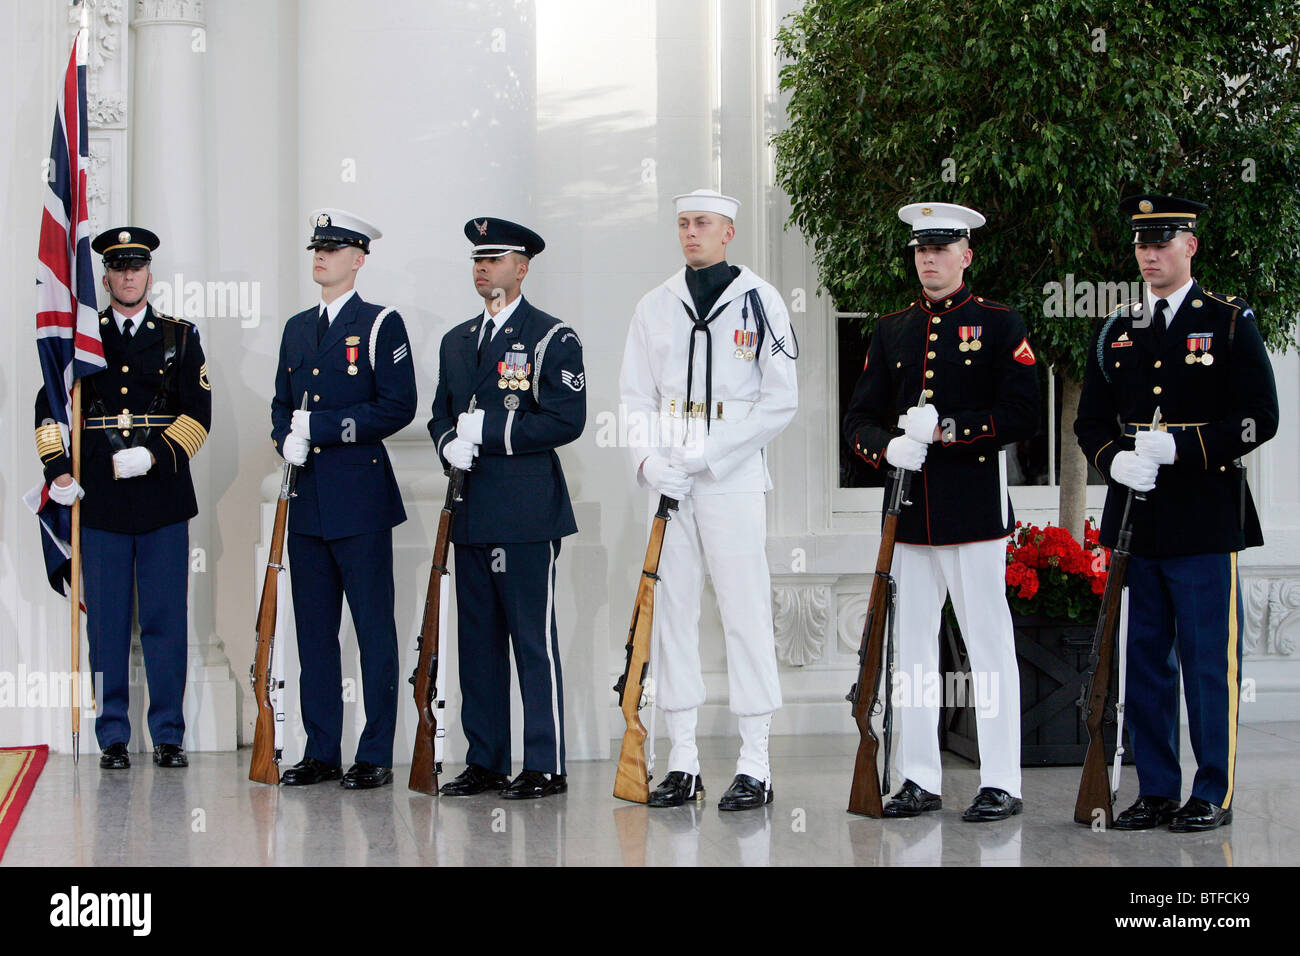 Military officers from army, navy, coastguard, airforce and marines as ceremonial guard at the White House, Washington DC, USA Stock Photo